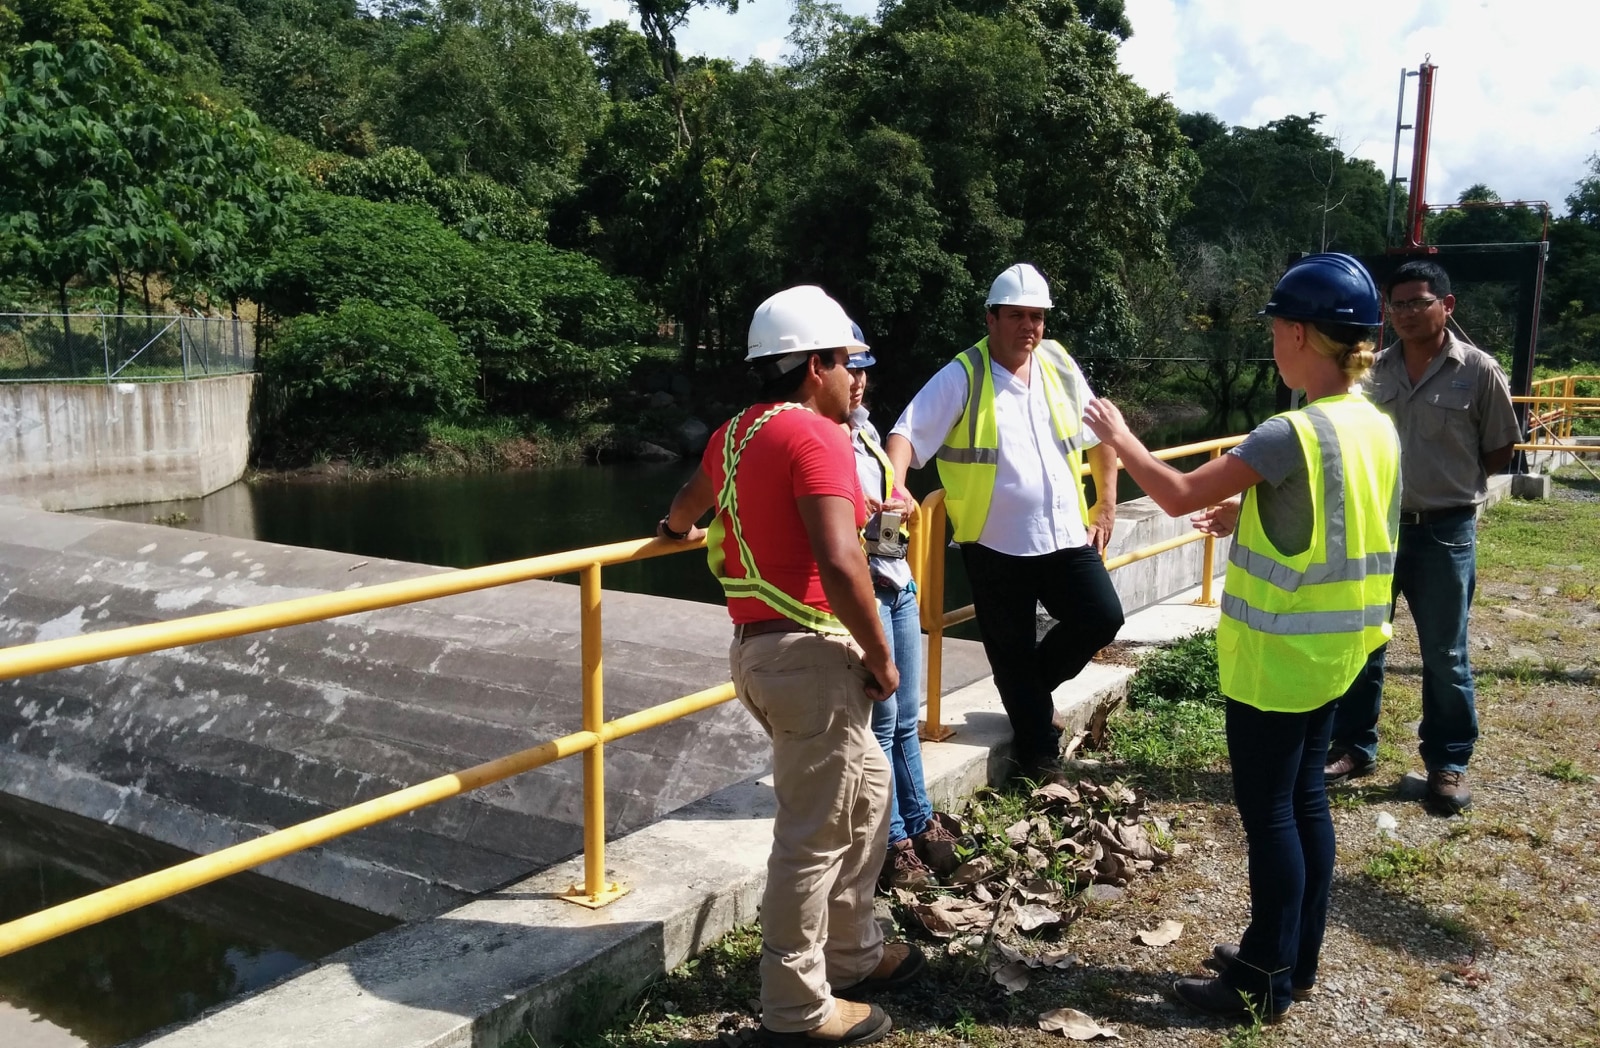 Anne Heggli with Hydropower agency in Panama